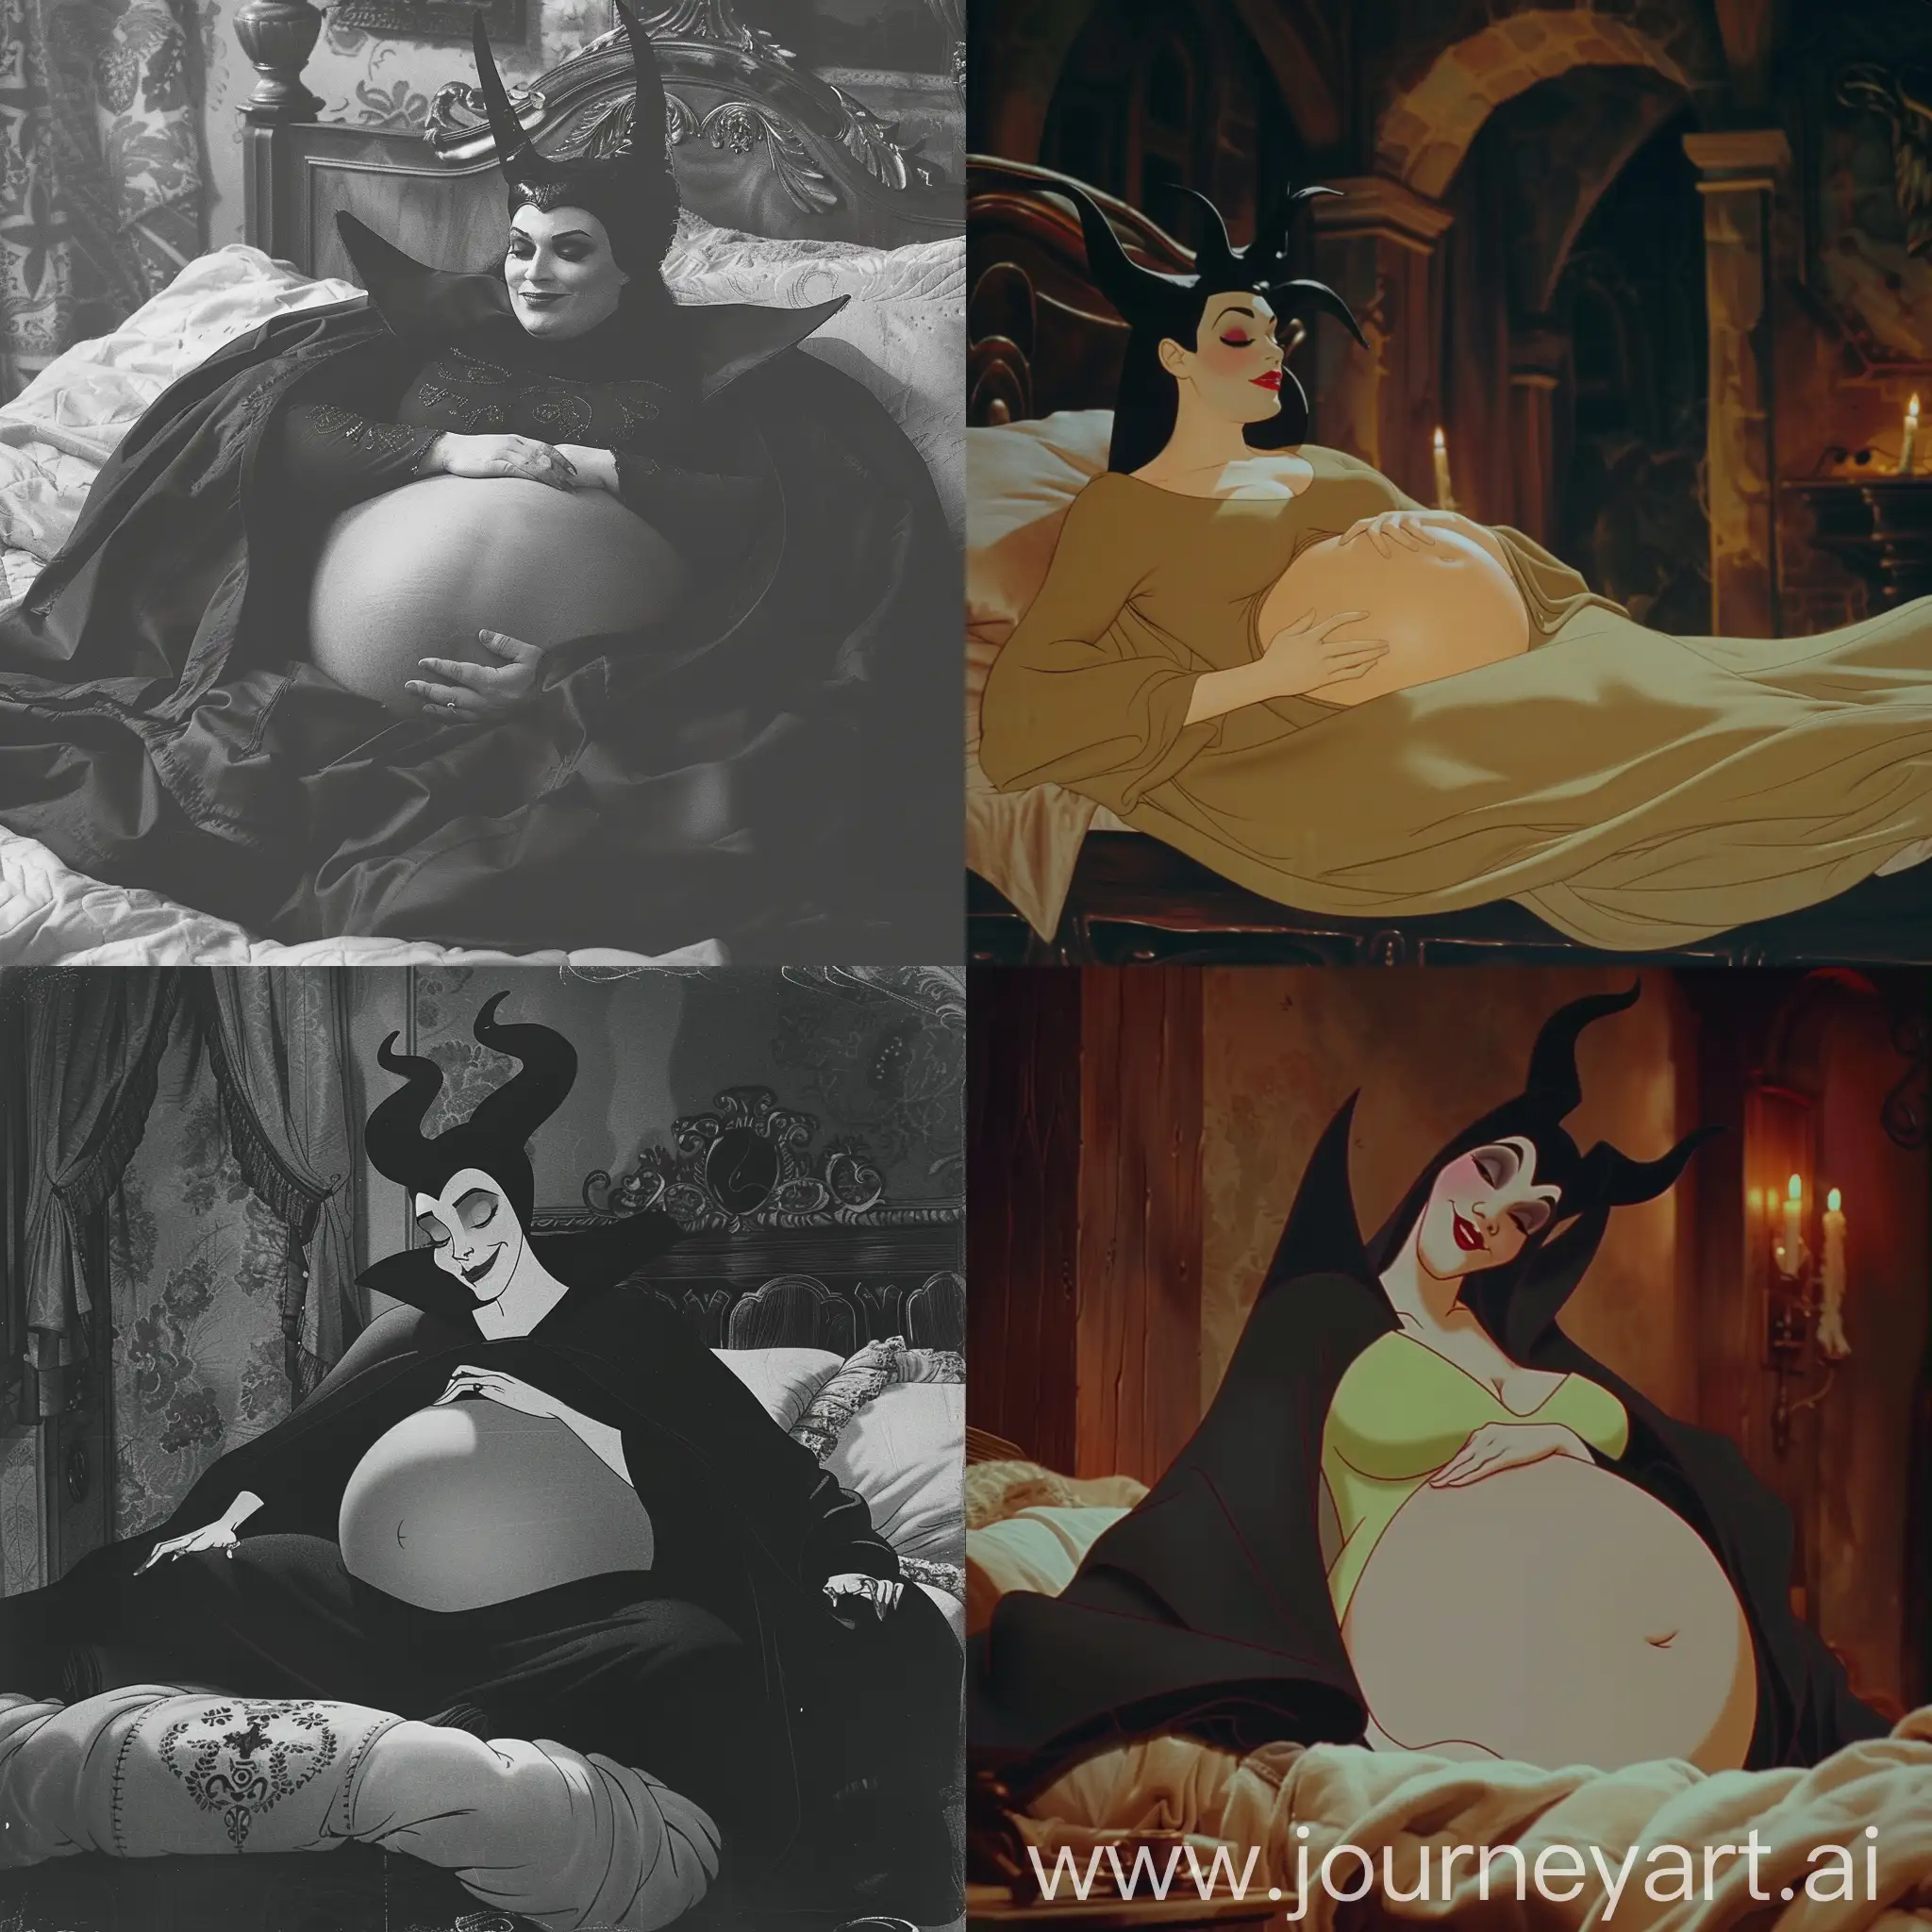 Pregnant-Maleficent-Rests-in-Bed-A-Serene-Moment-of-Maternal-Anticipation